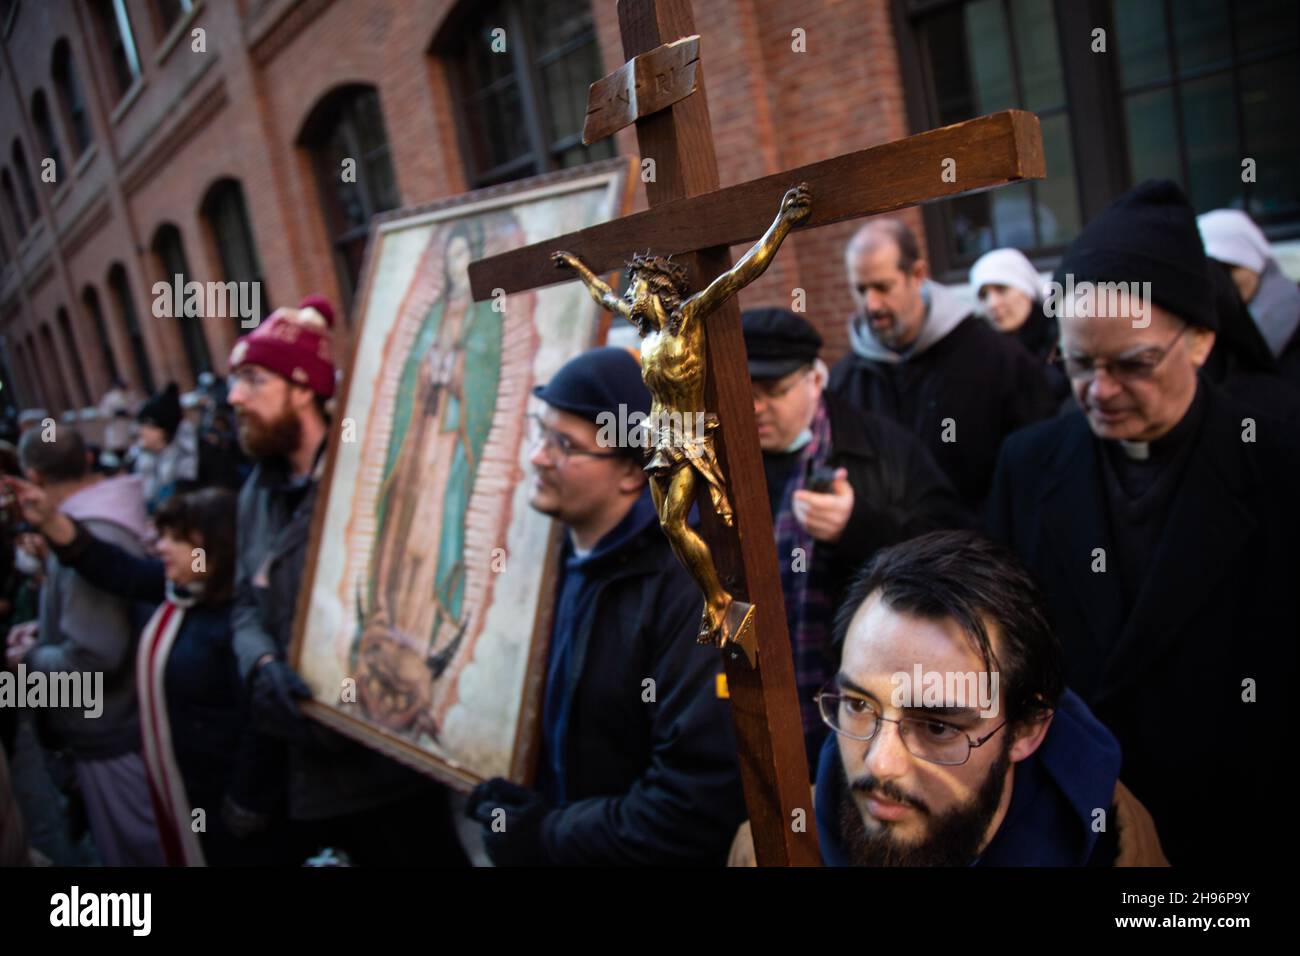 New York, United States. 04th Dec, 2021. A protester holds a cross during the demonstration.Counter-demonstrators ( pro choice) gathered at St. Patrick's Old Cathedral to disrupt a march of the pro-life church group “Witness for Life” on their way to Planned Parenthood. Counter-demonstrators with NYC for Abortion Rights shouted counter slogans to drown out the prayers of pro-lifers, as well as blocking their access to anyone entering Planned Parenthood. Credit: SOPA Images Limited/Alamy Live News Stock Photo